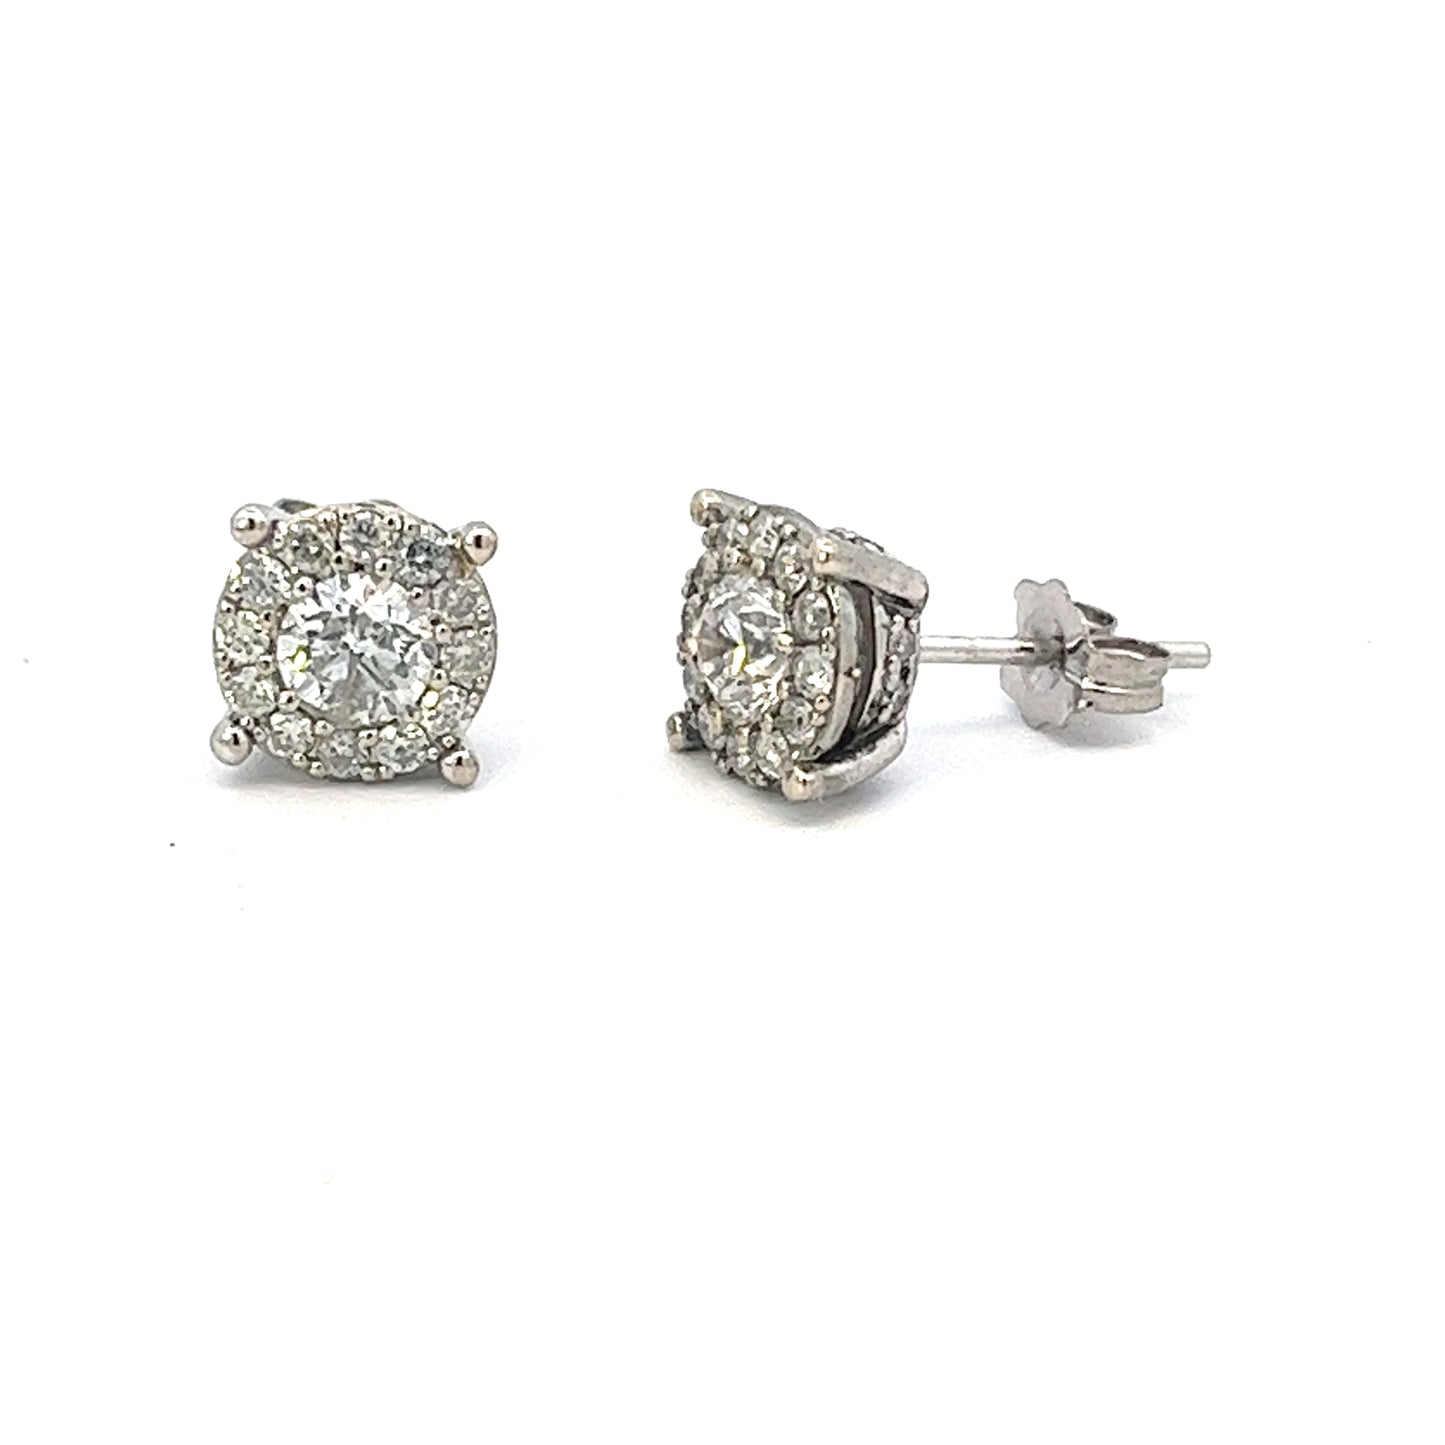 1.00ct total weight round diamonds earrings